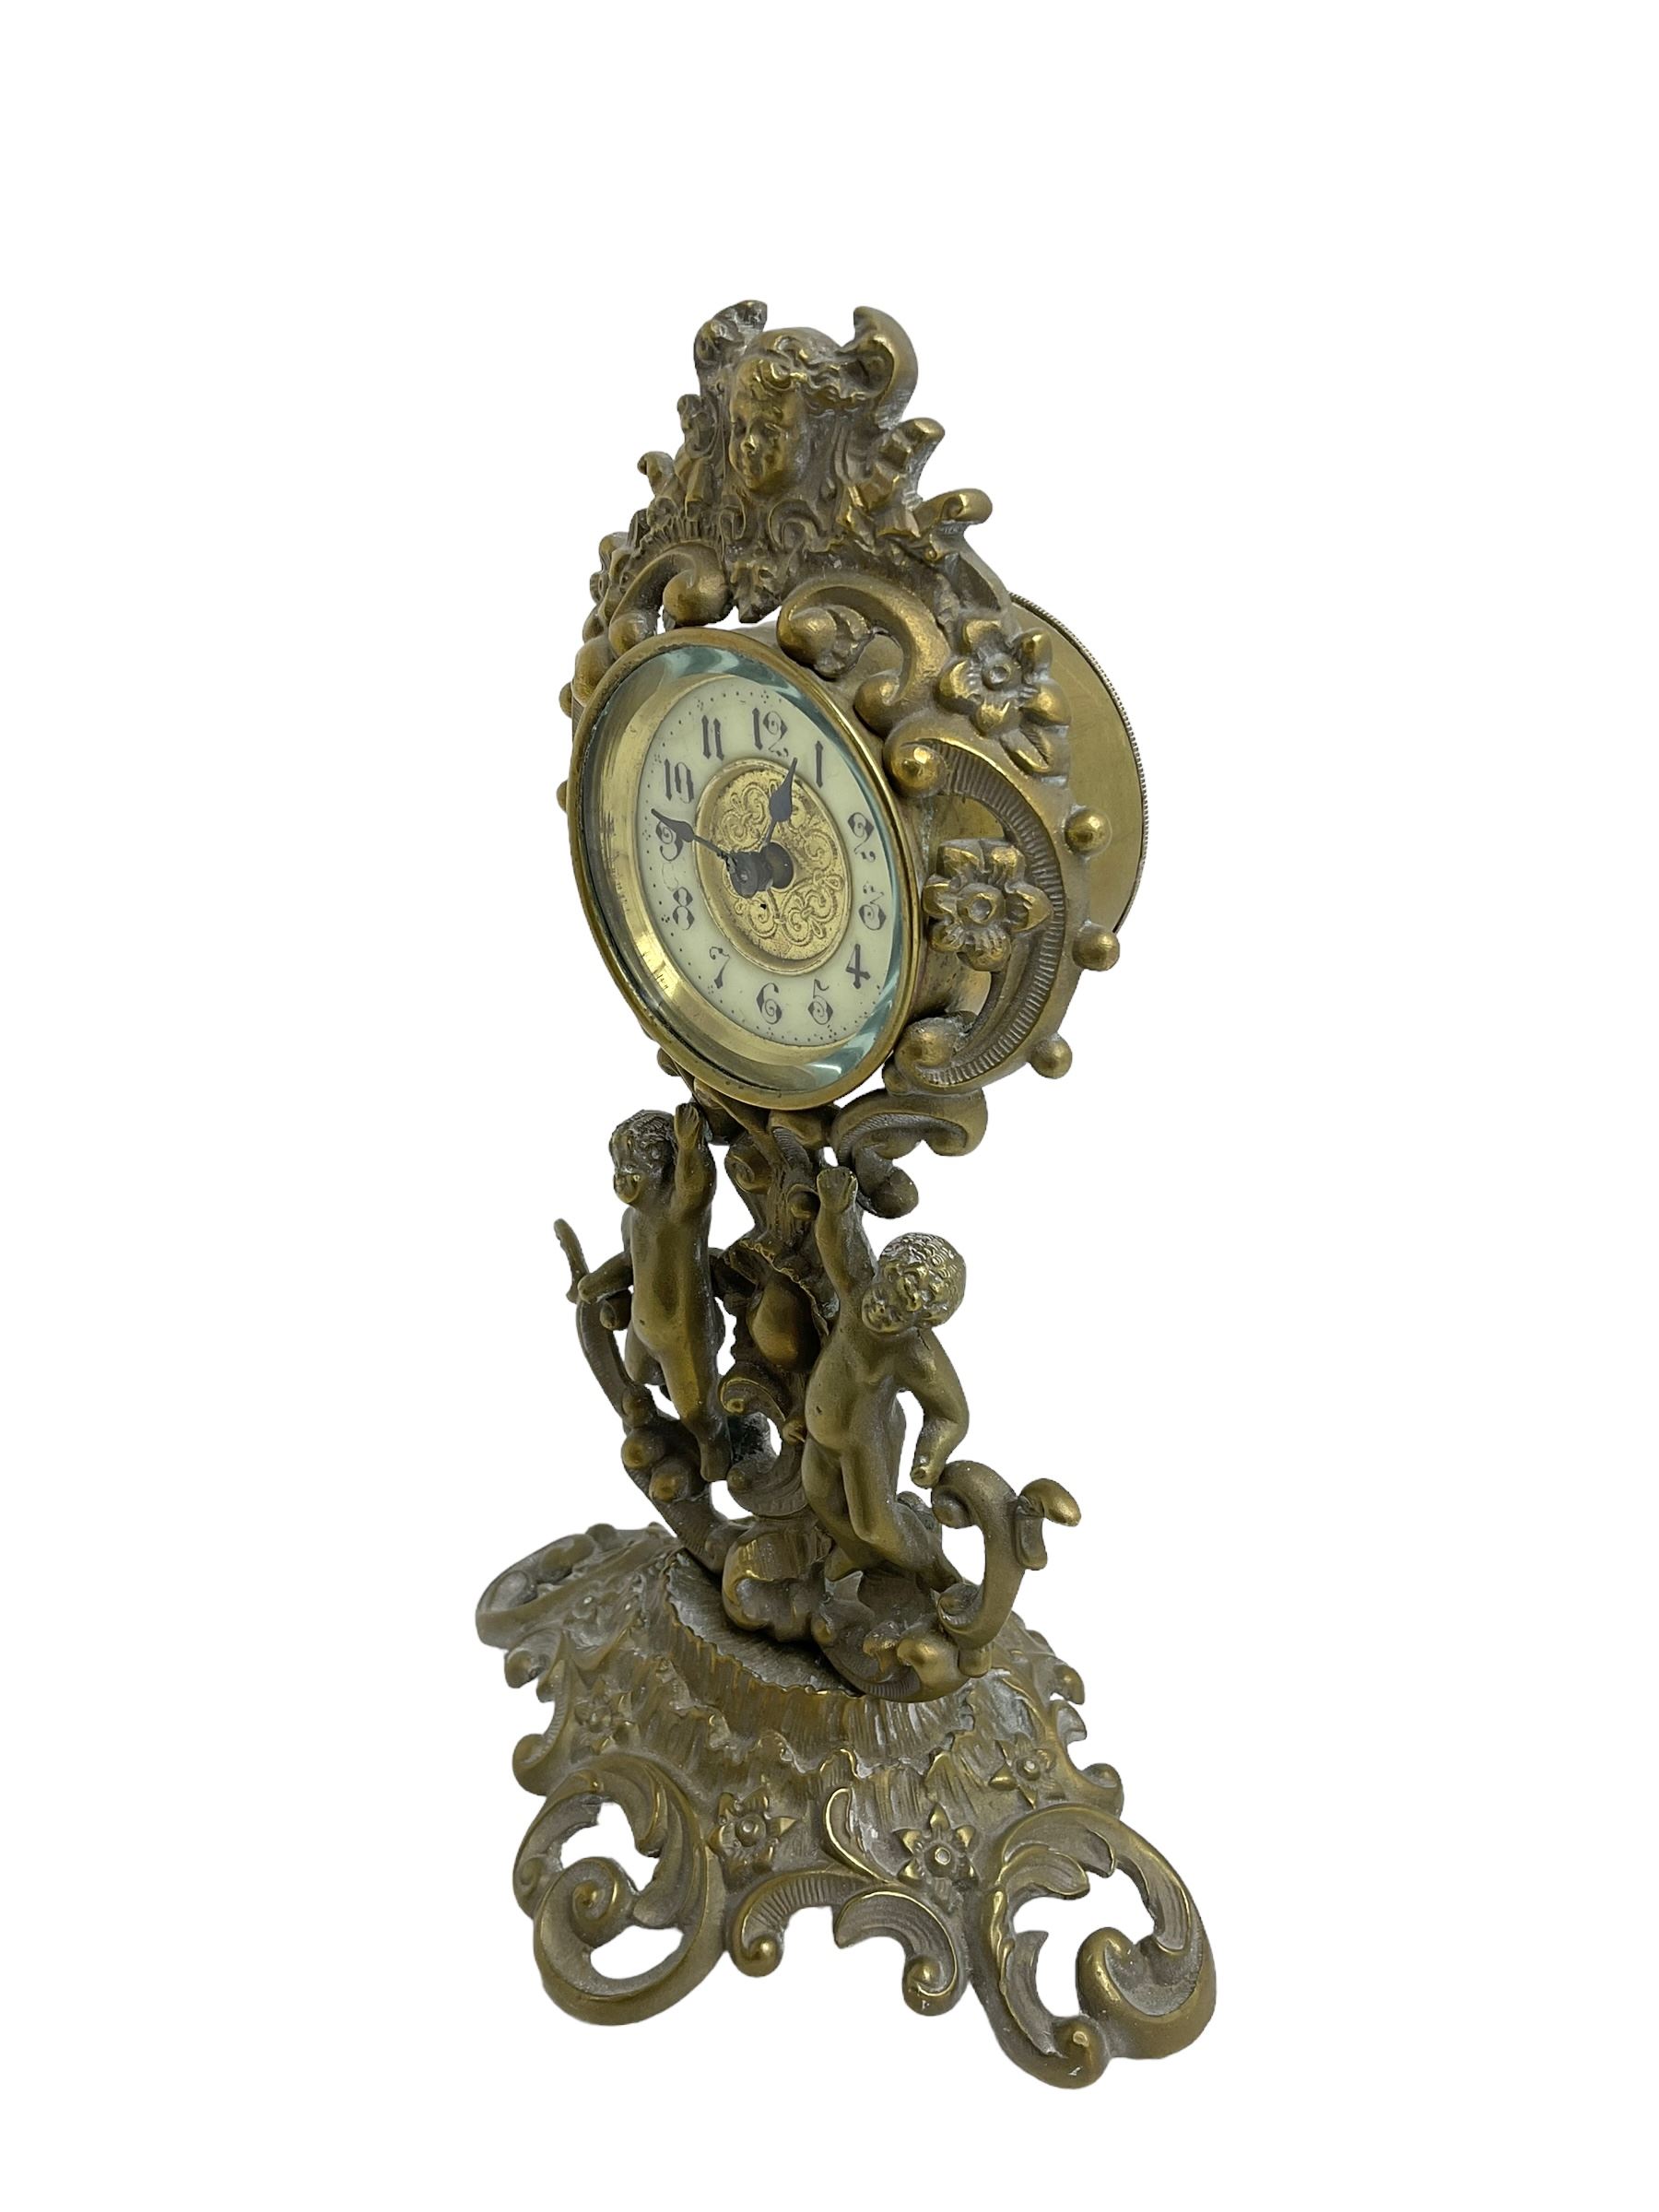 British united clock company - early 20th century English timepiece mantle clock - Image 2 of 3